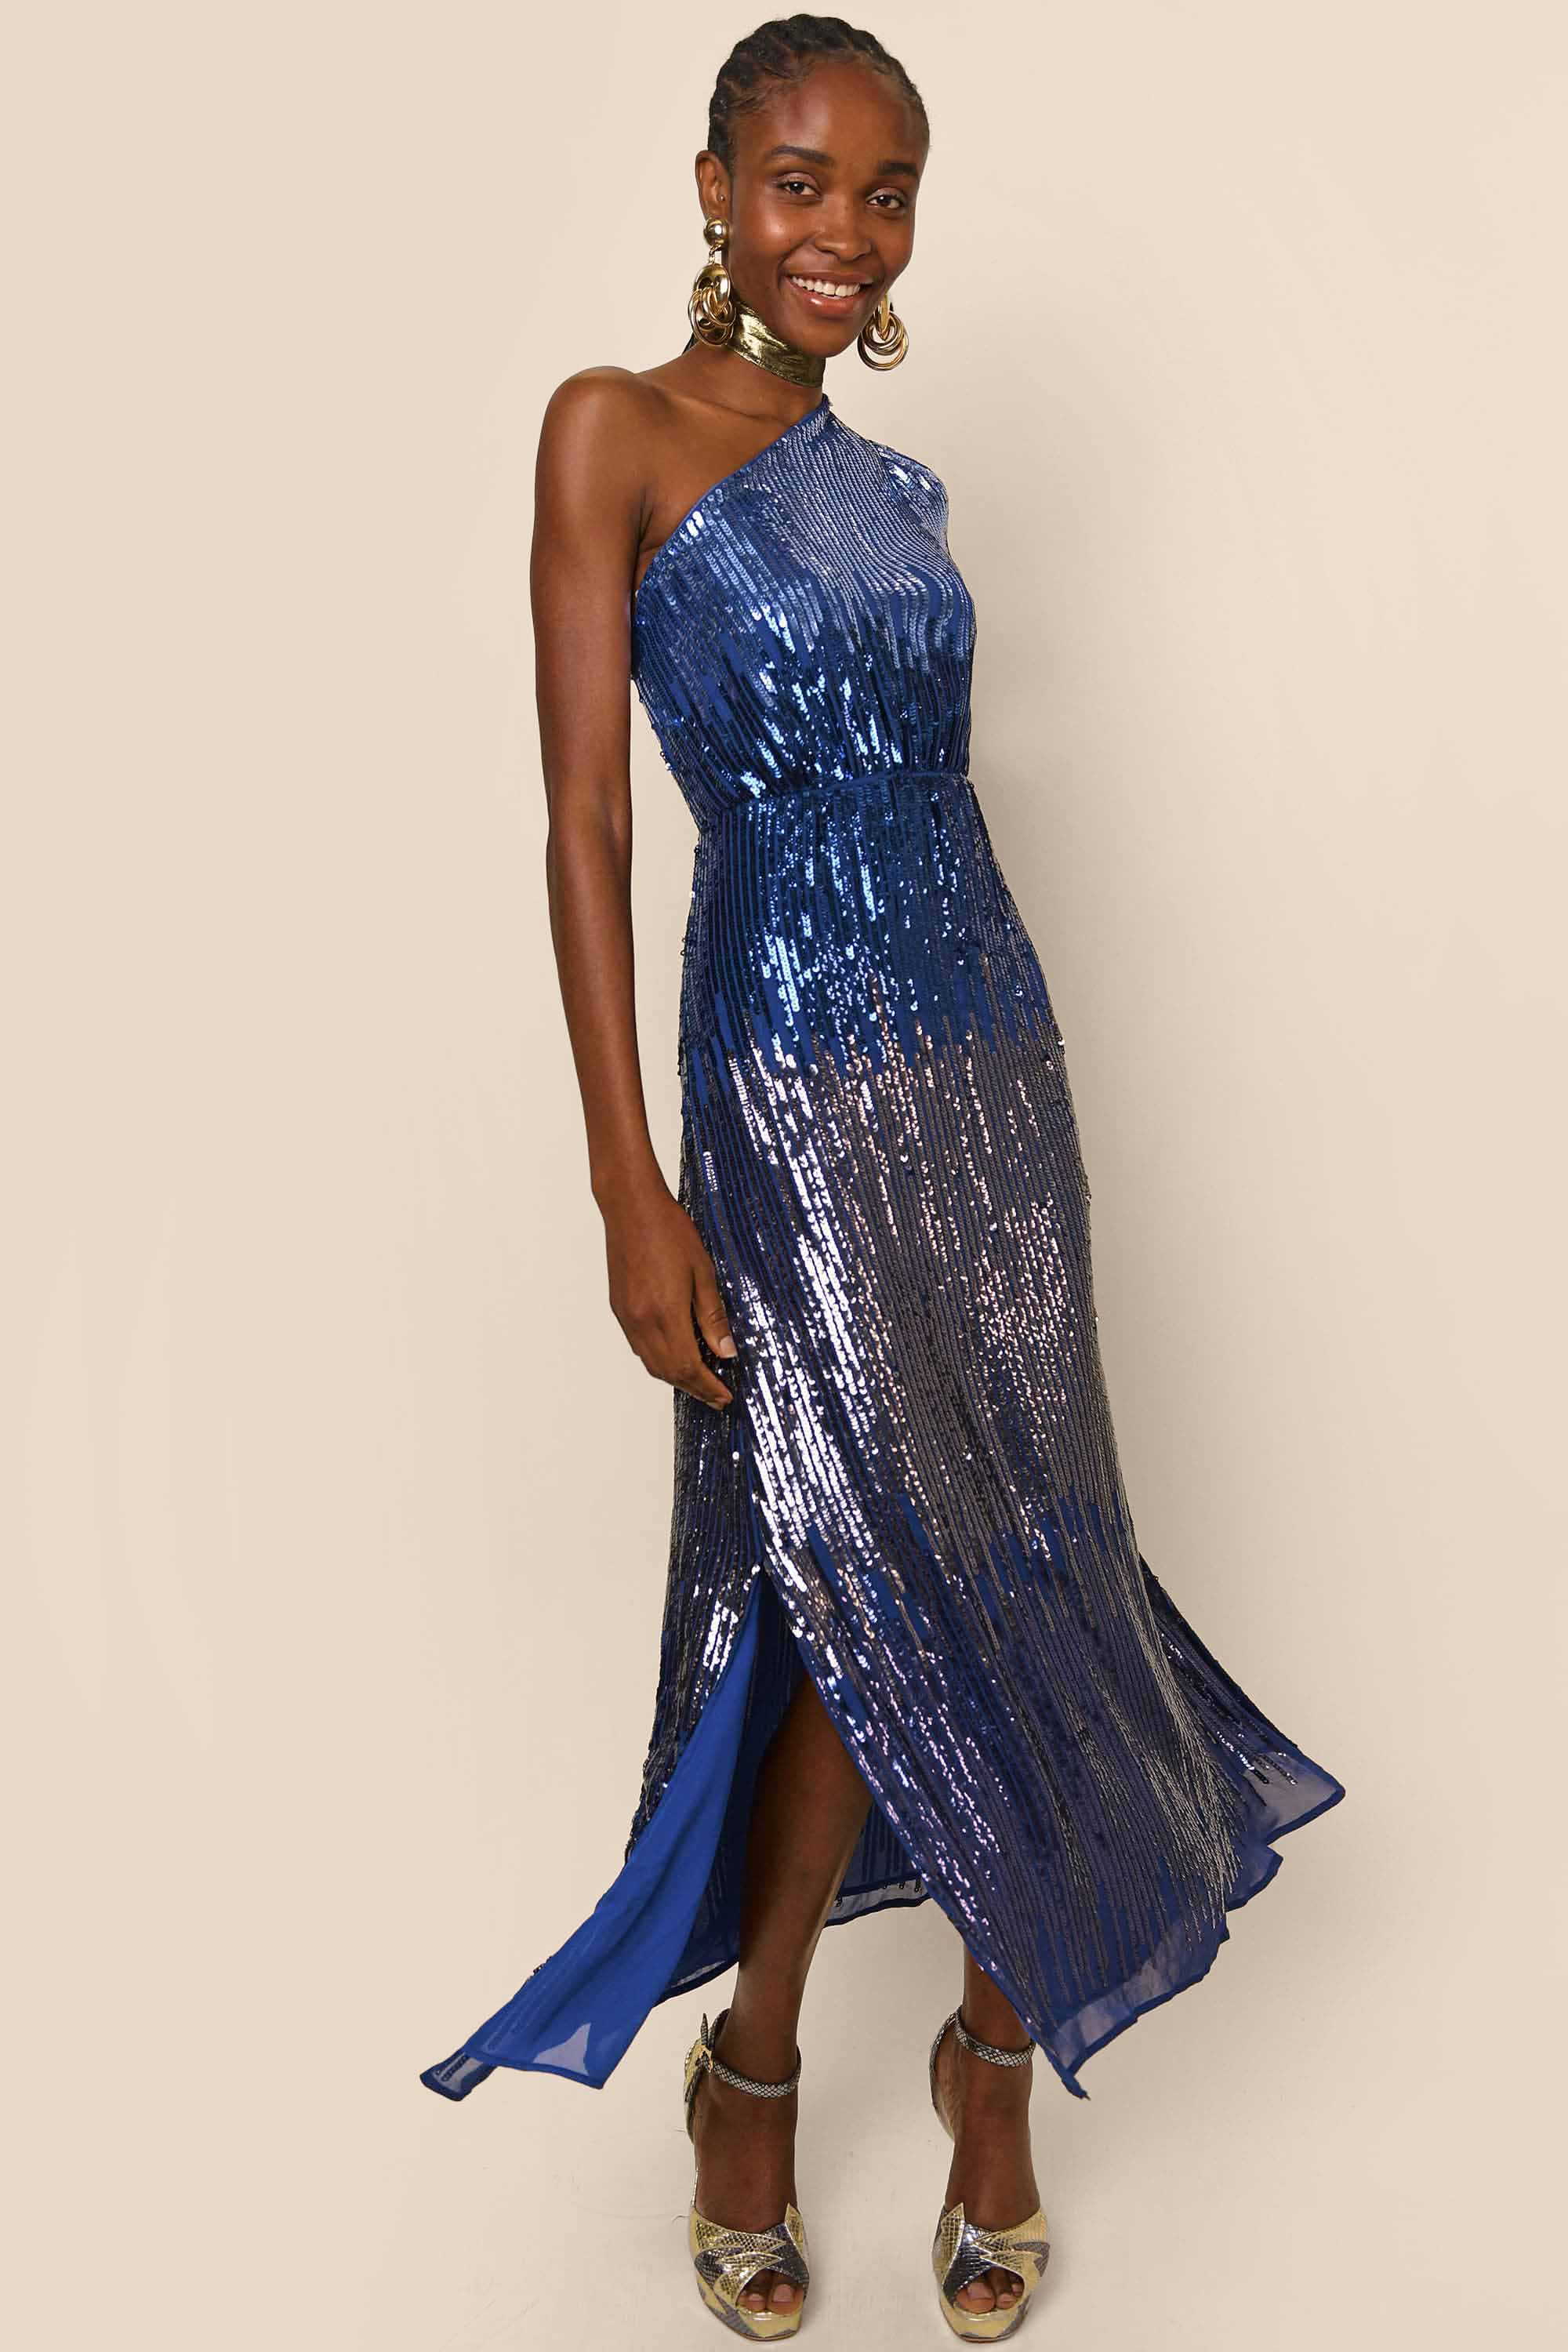 Backless Long Blue Sequin Prom Dress - PromGirl